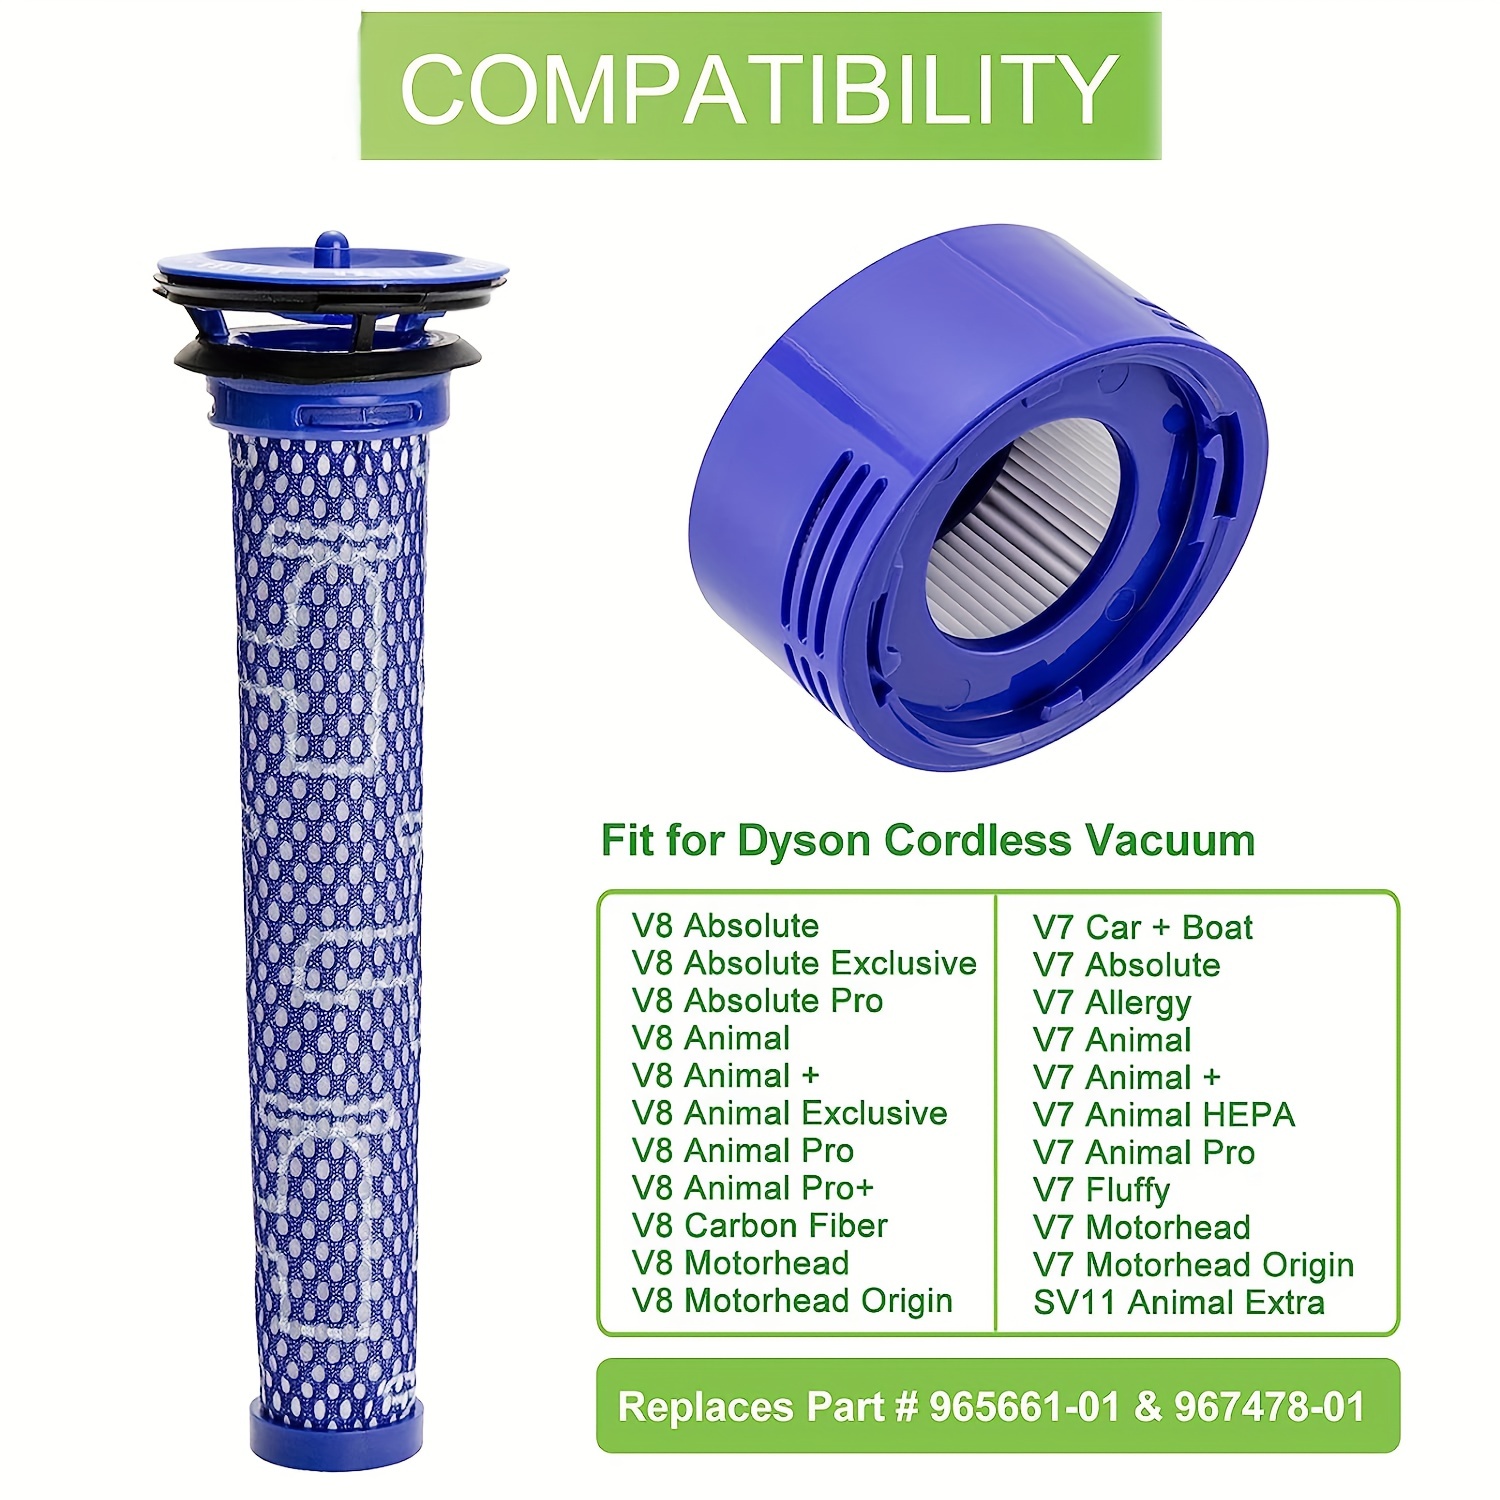  Filter for Dyson V6 Absolute Motorhead Cordless Stick